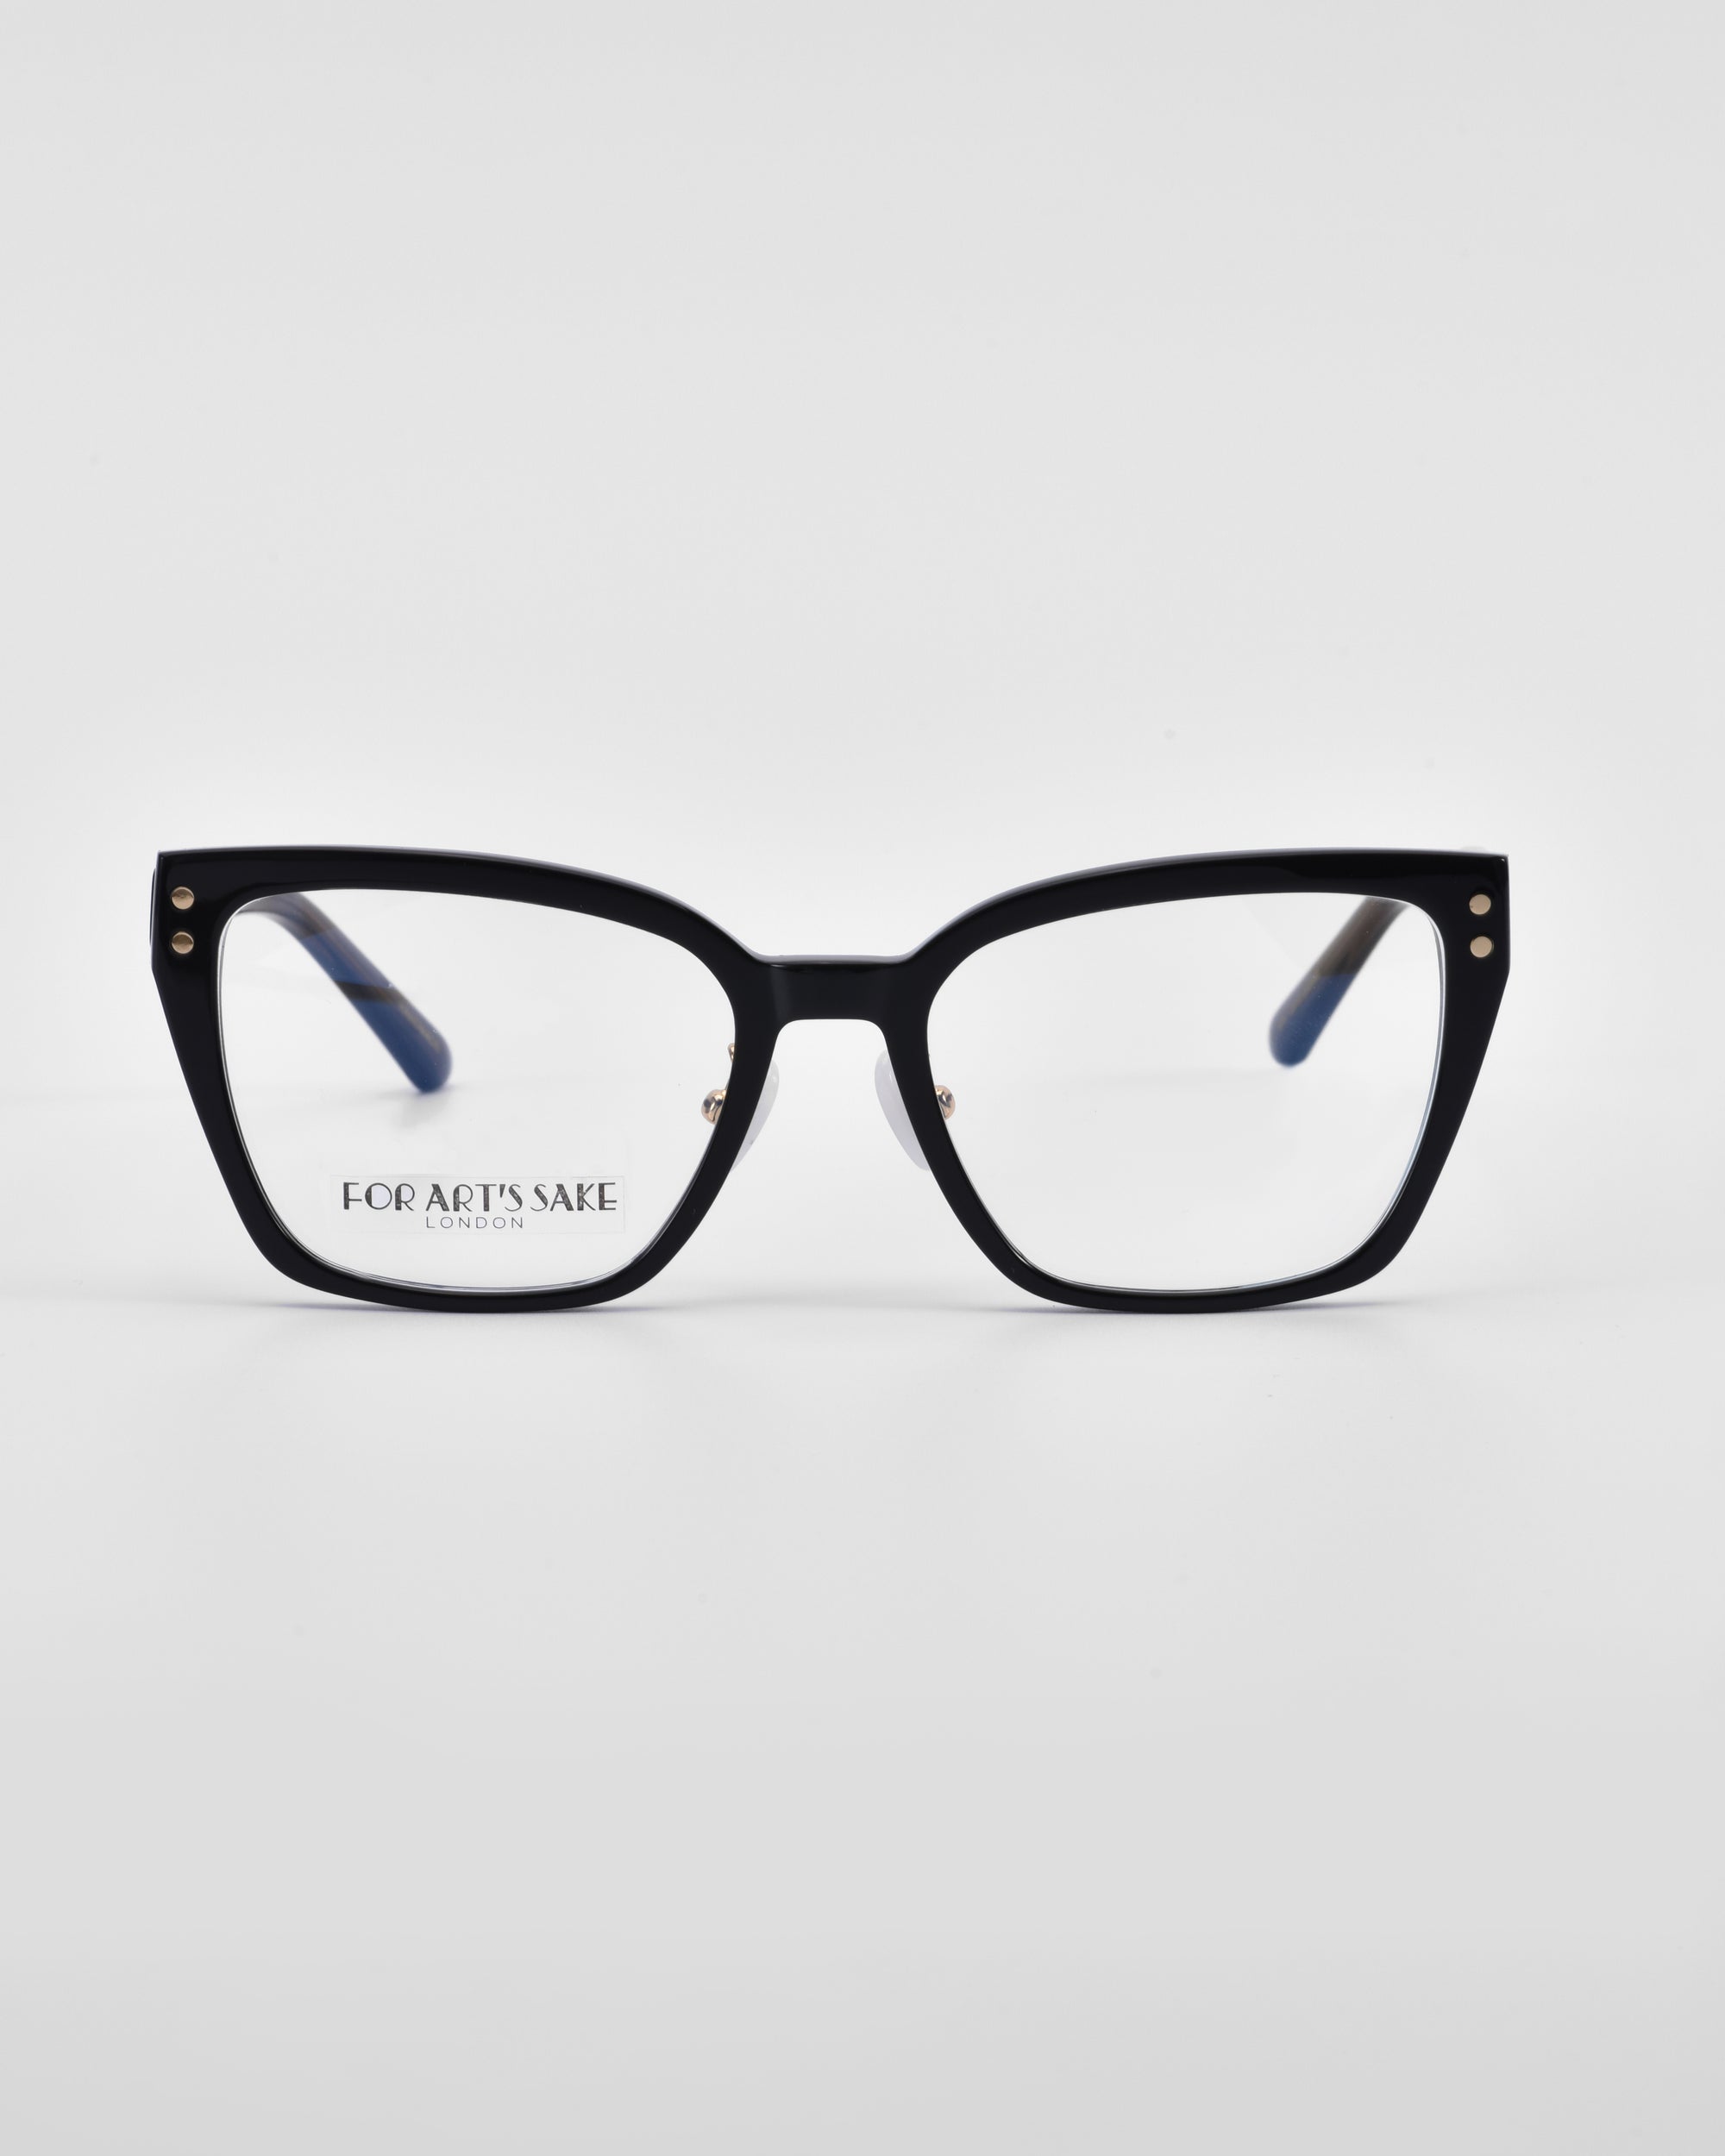 A pair of black-framed eyeglasses with a geometric shape, slightly angled at the corners, resembling cat-eye opticals. The lenses are clear, and the words &quot;For Art&#39;s Sake®&quot; are visible on the inside of the left lens. The background is a plain white.